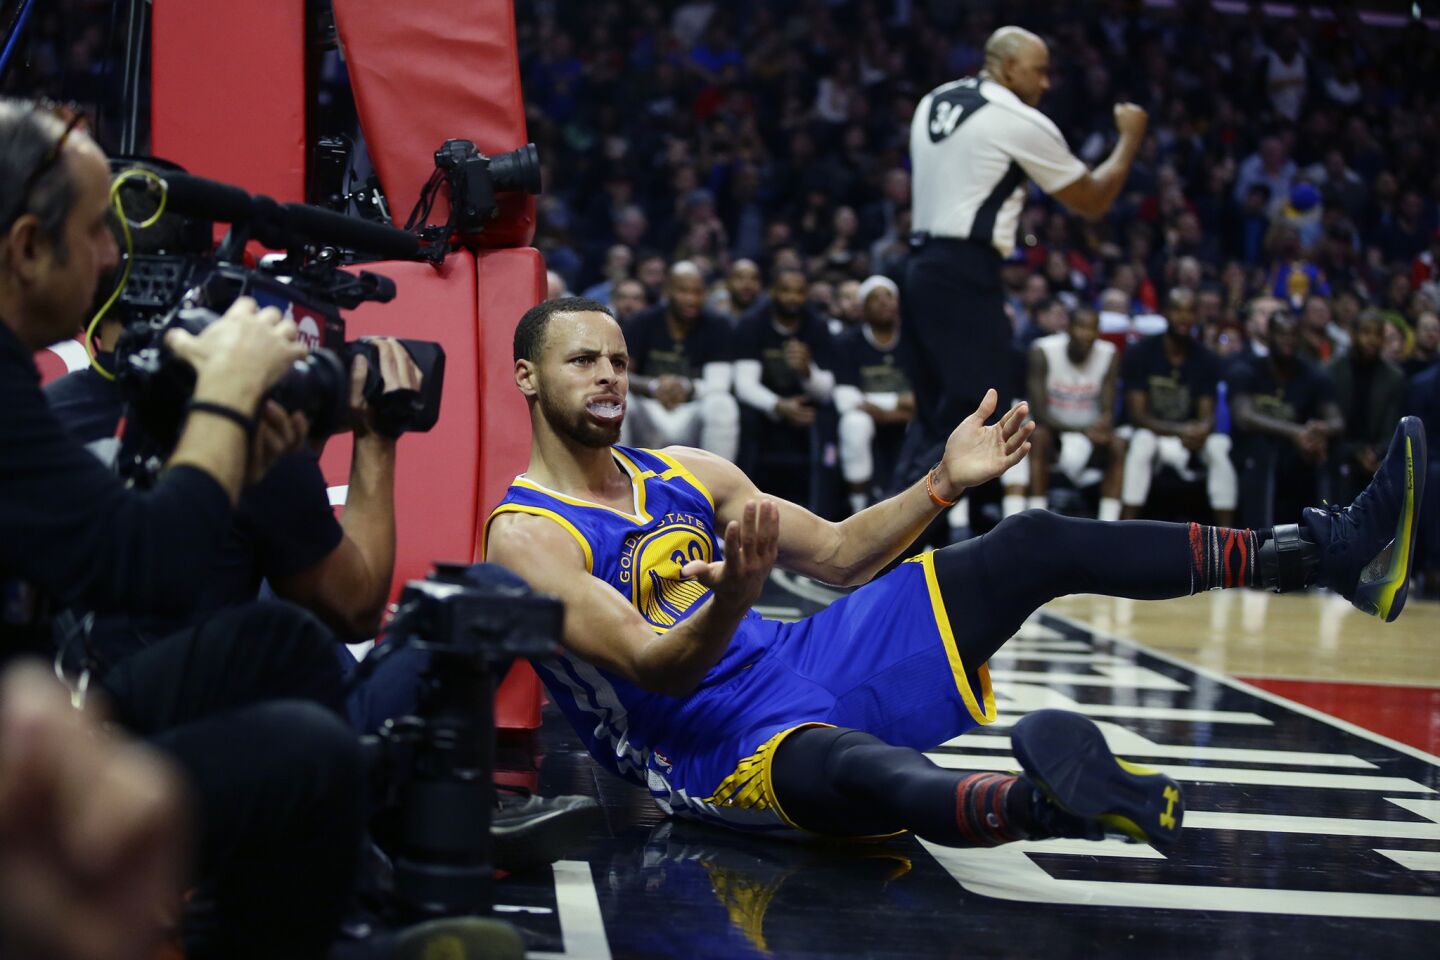 Warriors guard Stephen Curry looks for a foul call after scoring on a layup against the Clippers during the second half.